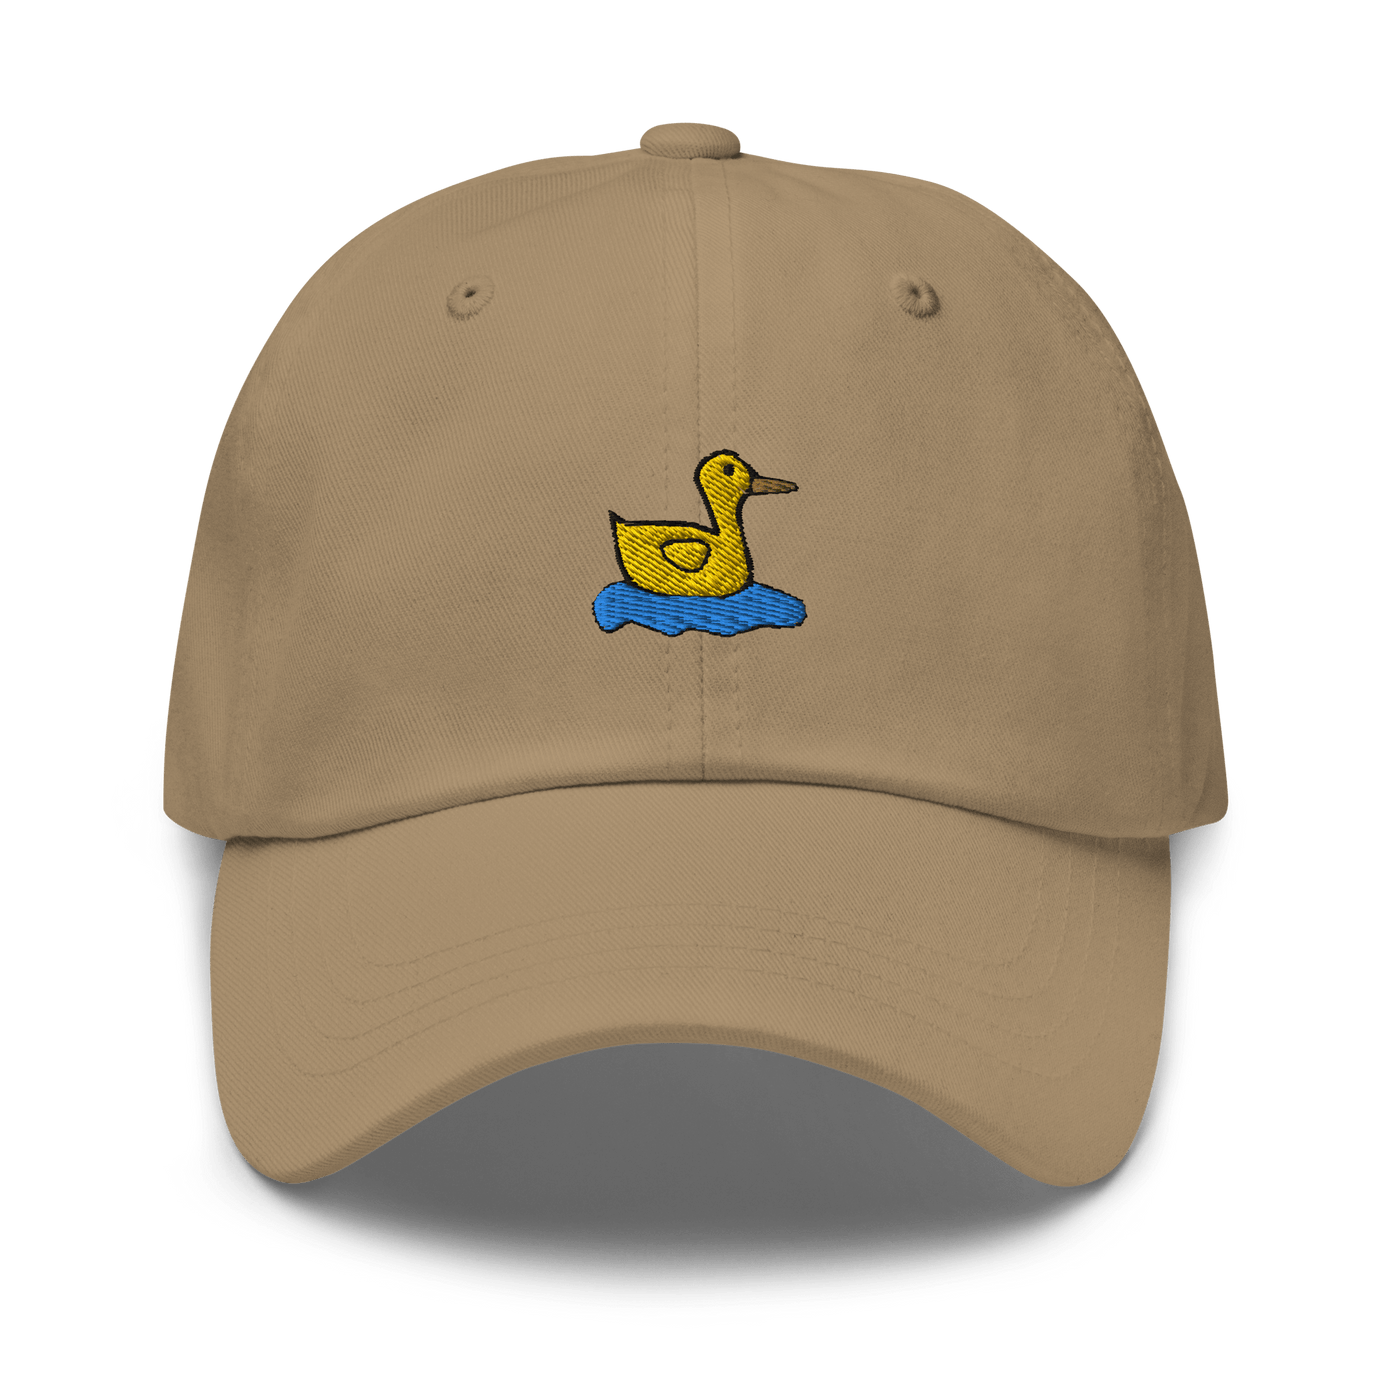 Lonely Duck Dad hat - Navy - - Just Another Cap Store